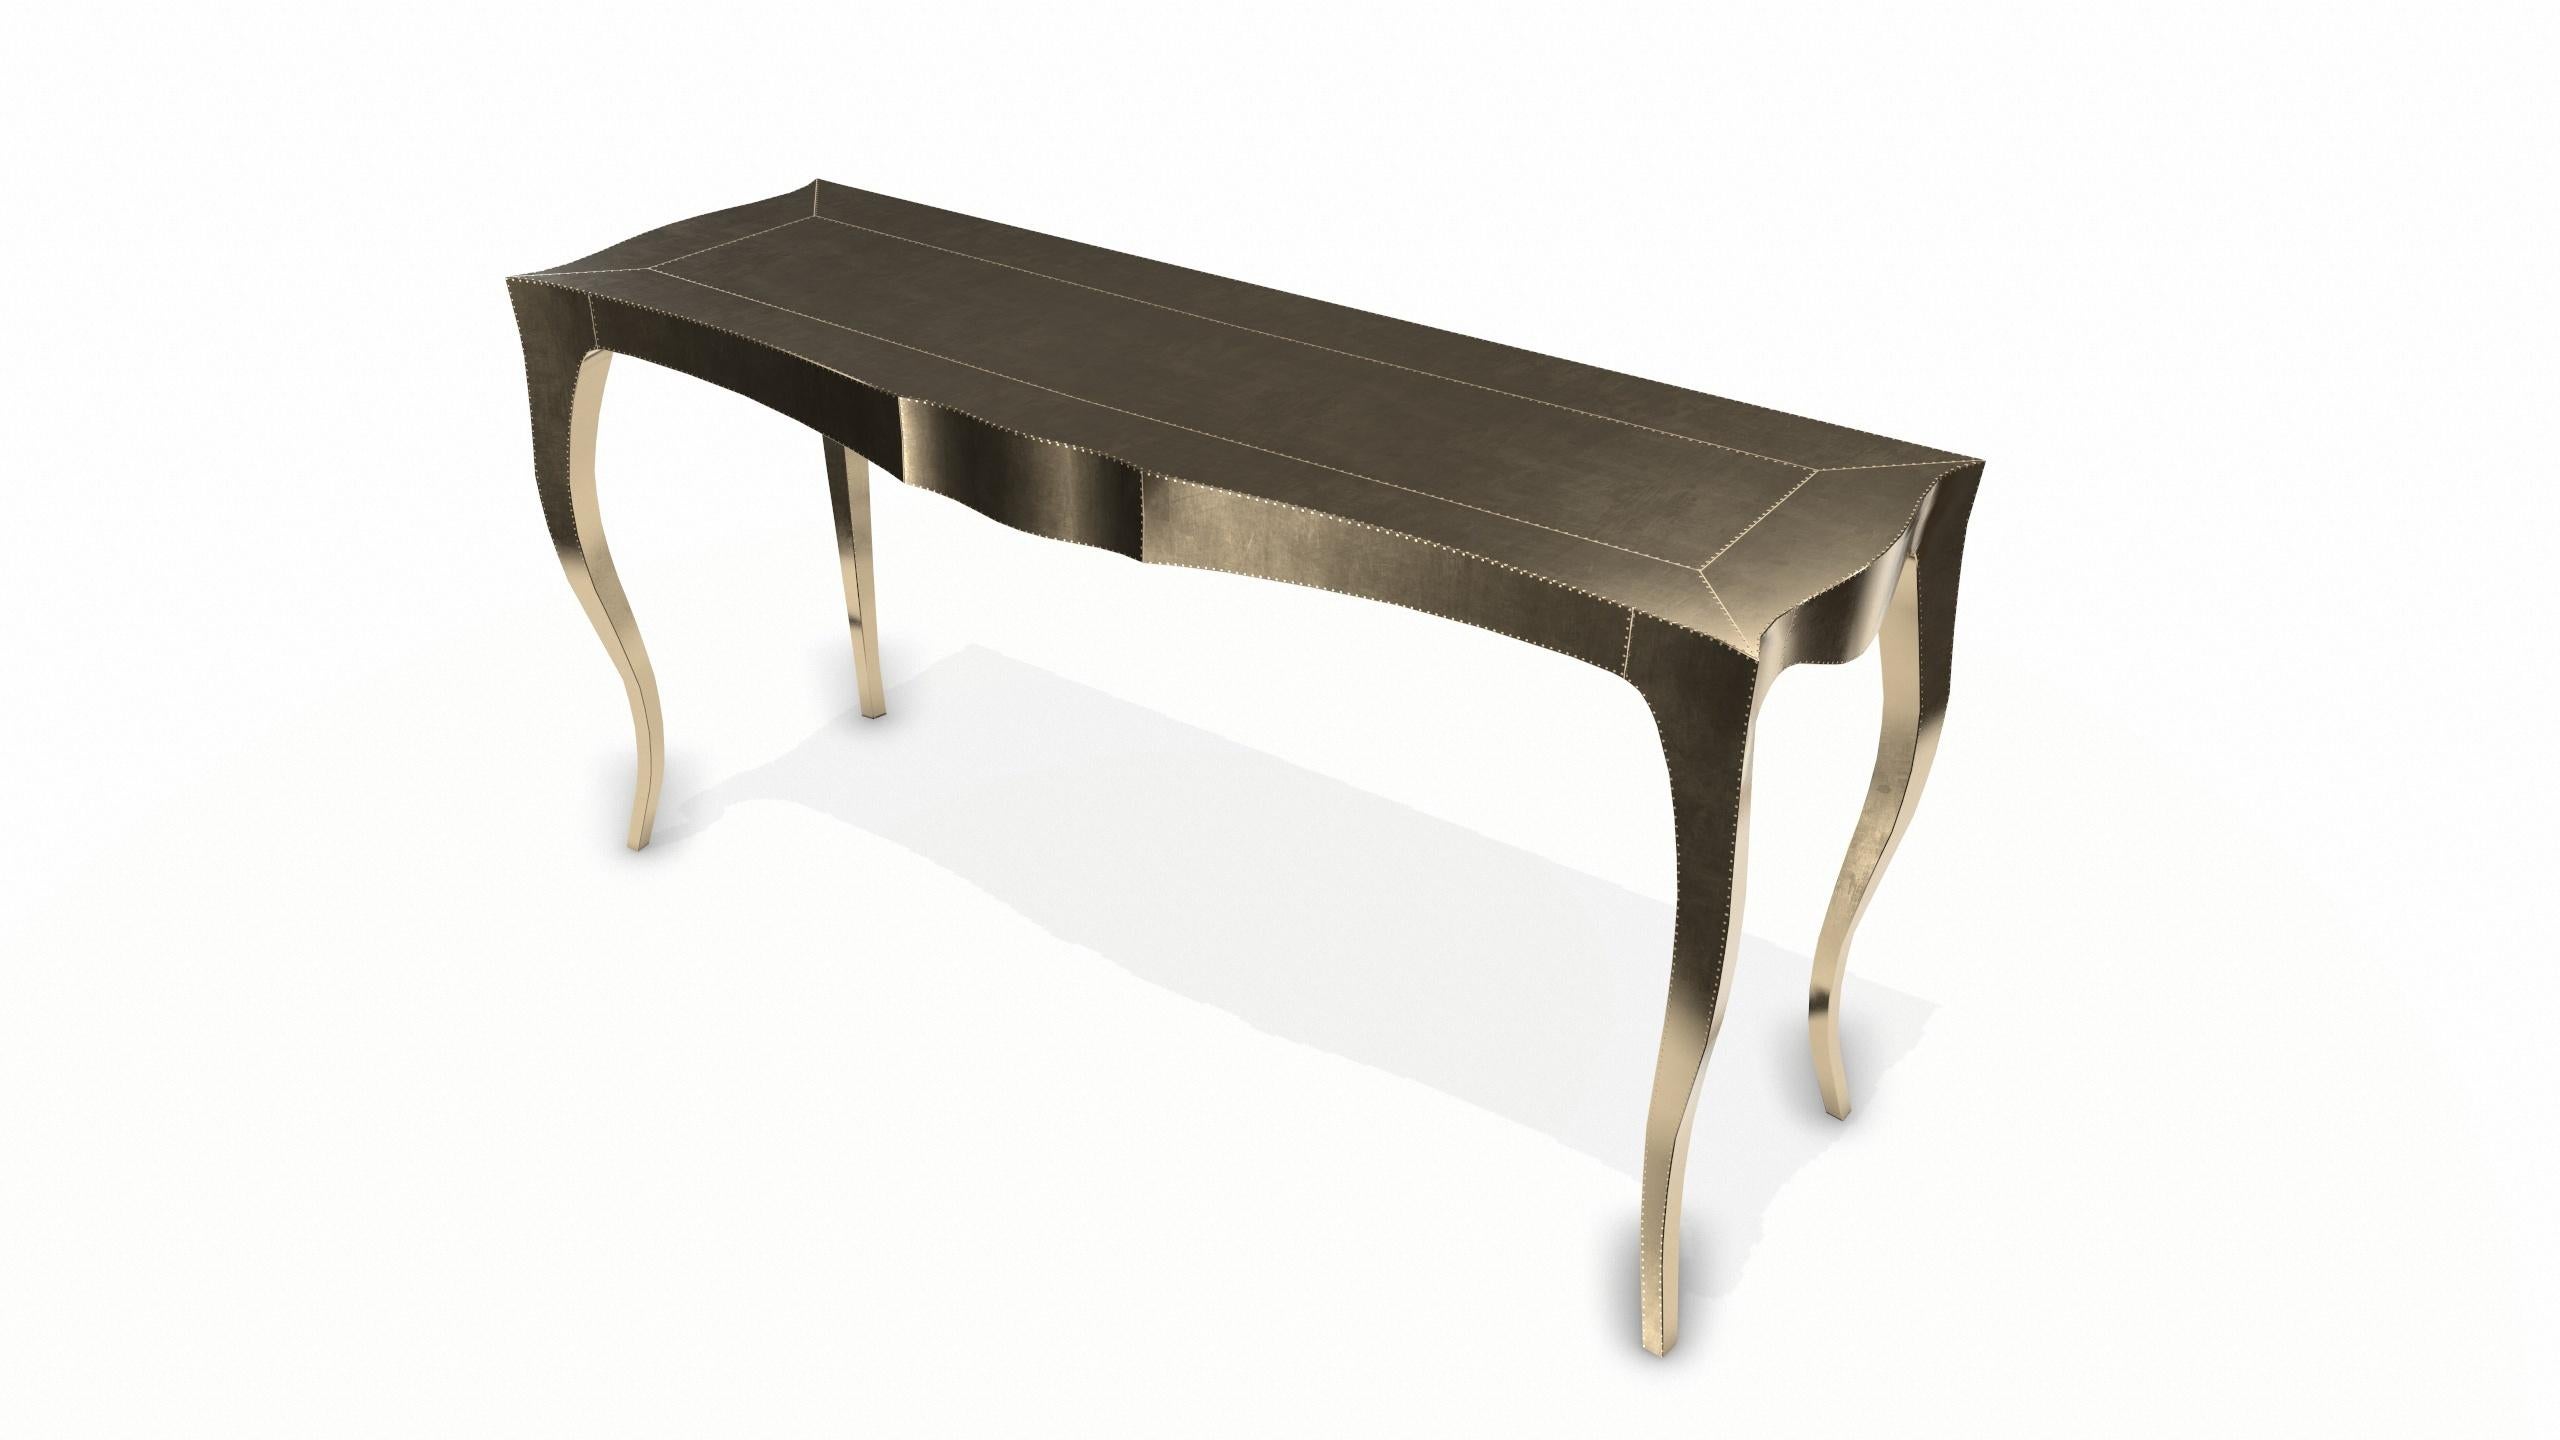 Other Louise Console Art Deco Center Tables Smooth Brass by Paul Mathieu For Sale